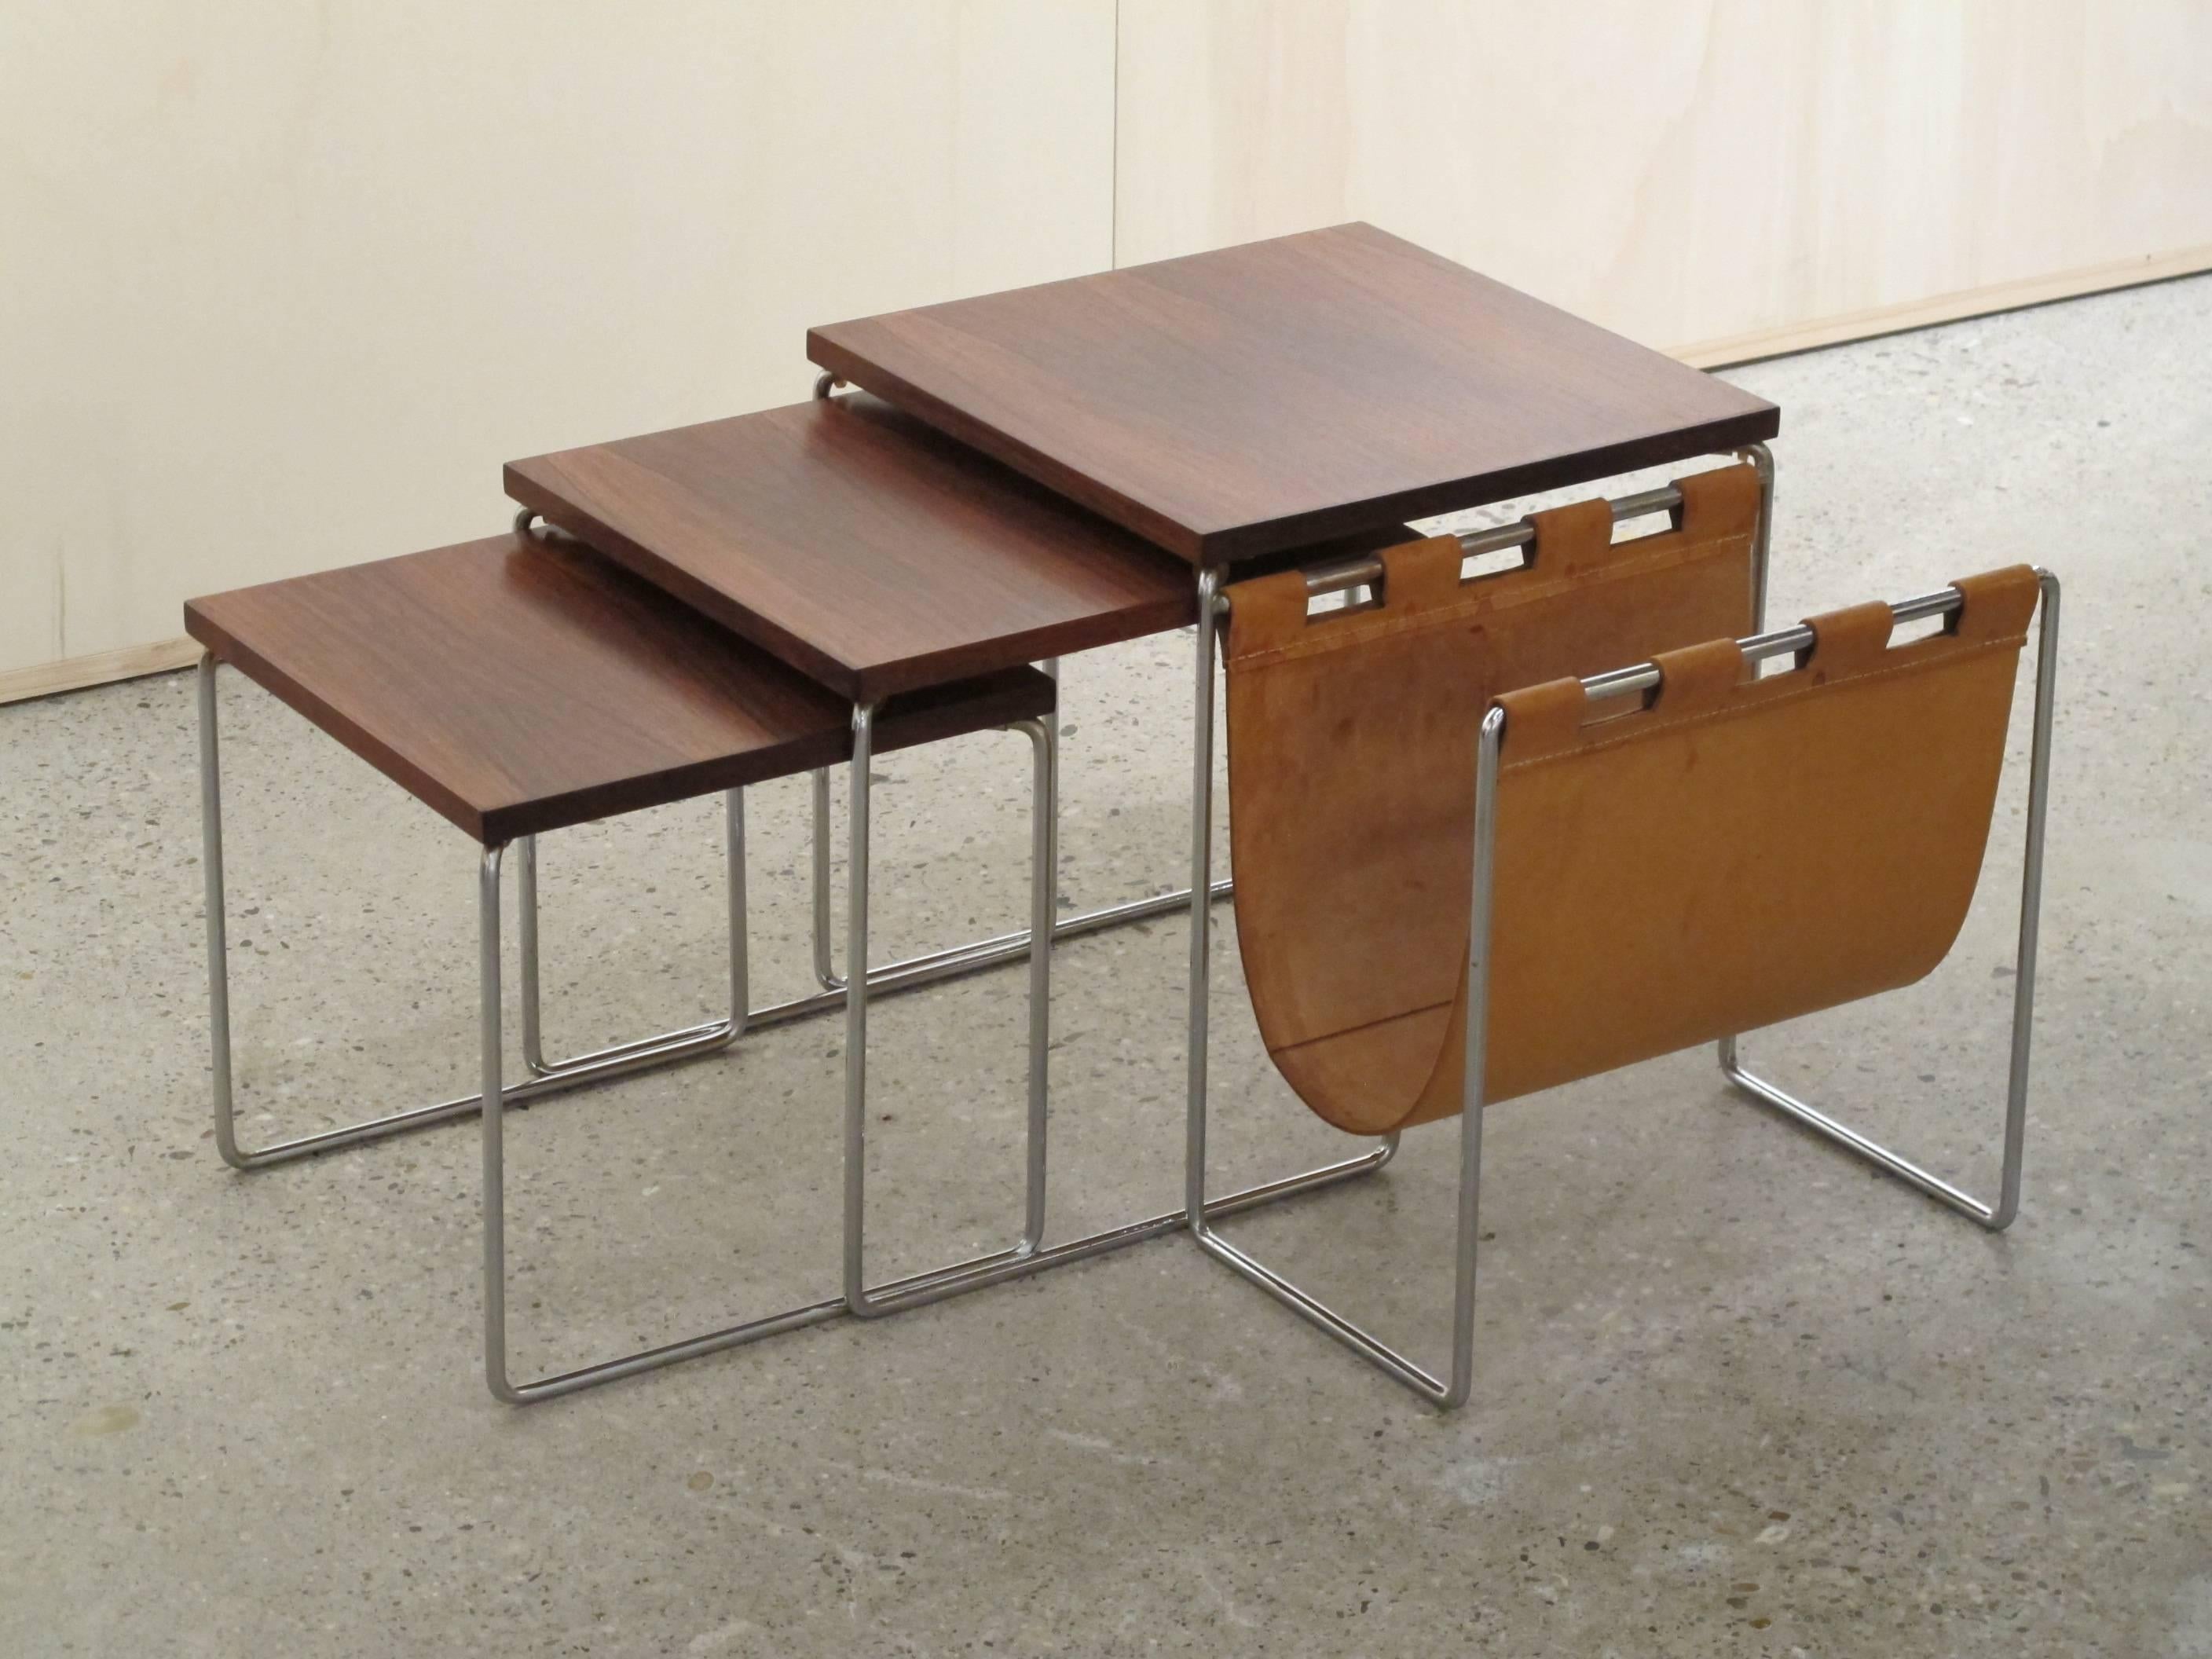 Set of vintage nesting tables with leather magazine rack and solid chromed frame.
Great rosewood veneer with beautiful continuous pattern over the three tables (see picture 3).

Measurements of the large table: 37H x 35 x 35 cm.
Measurements of